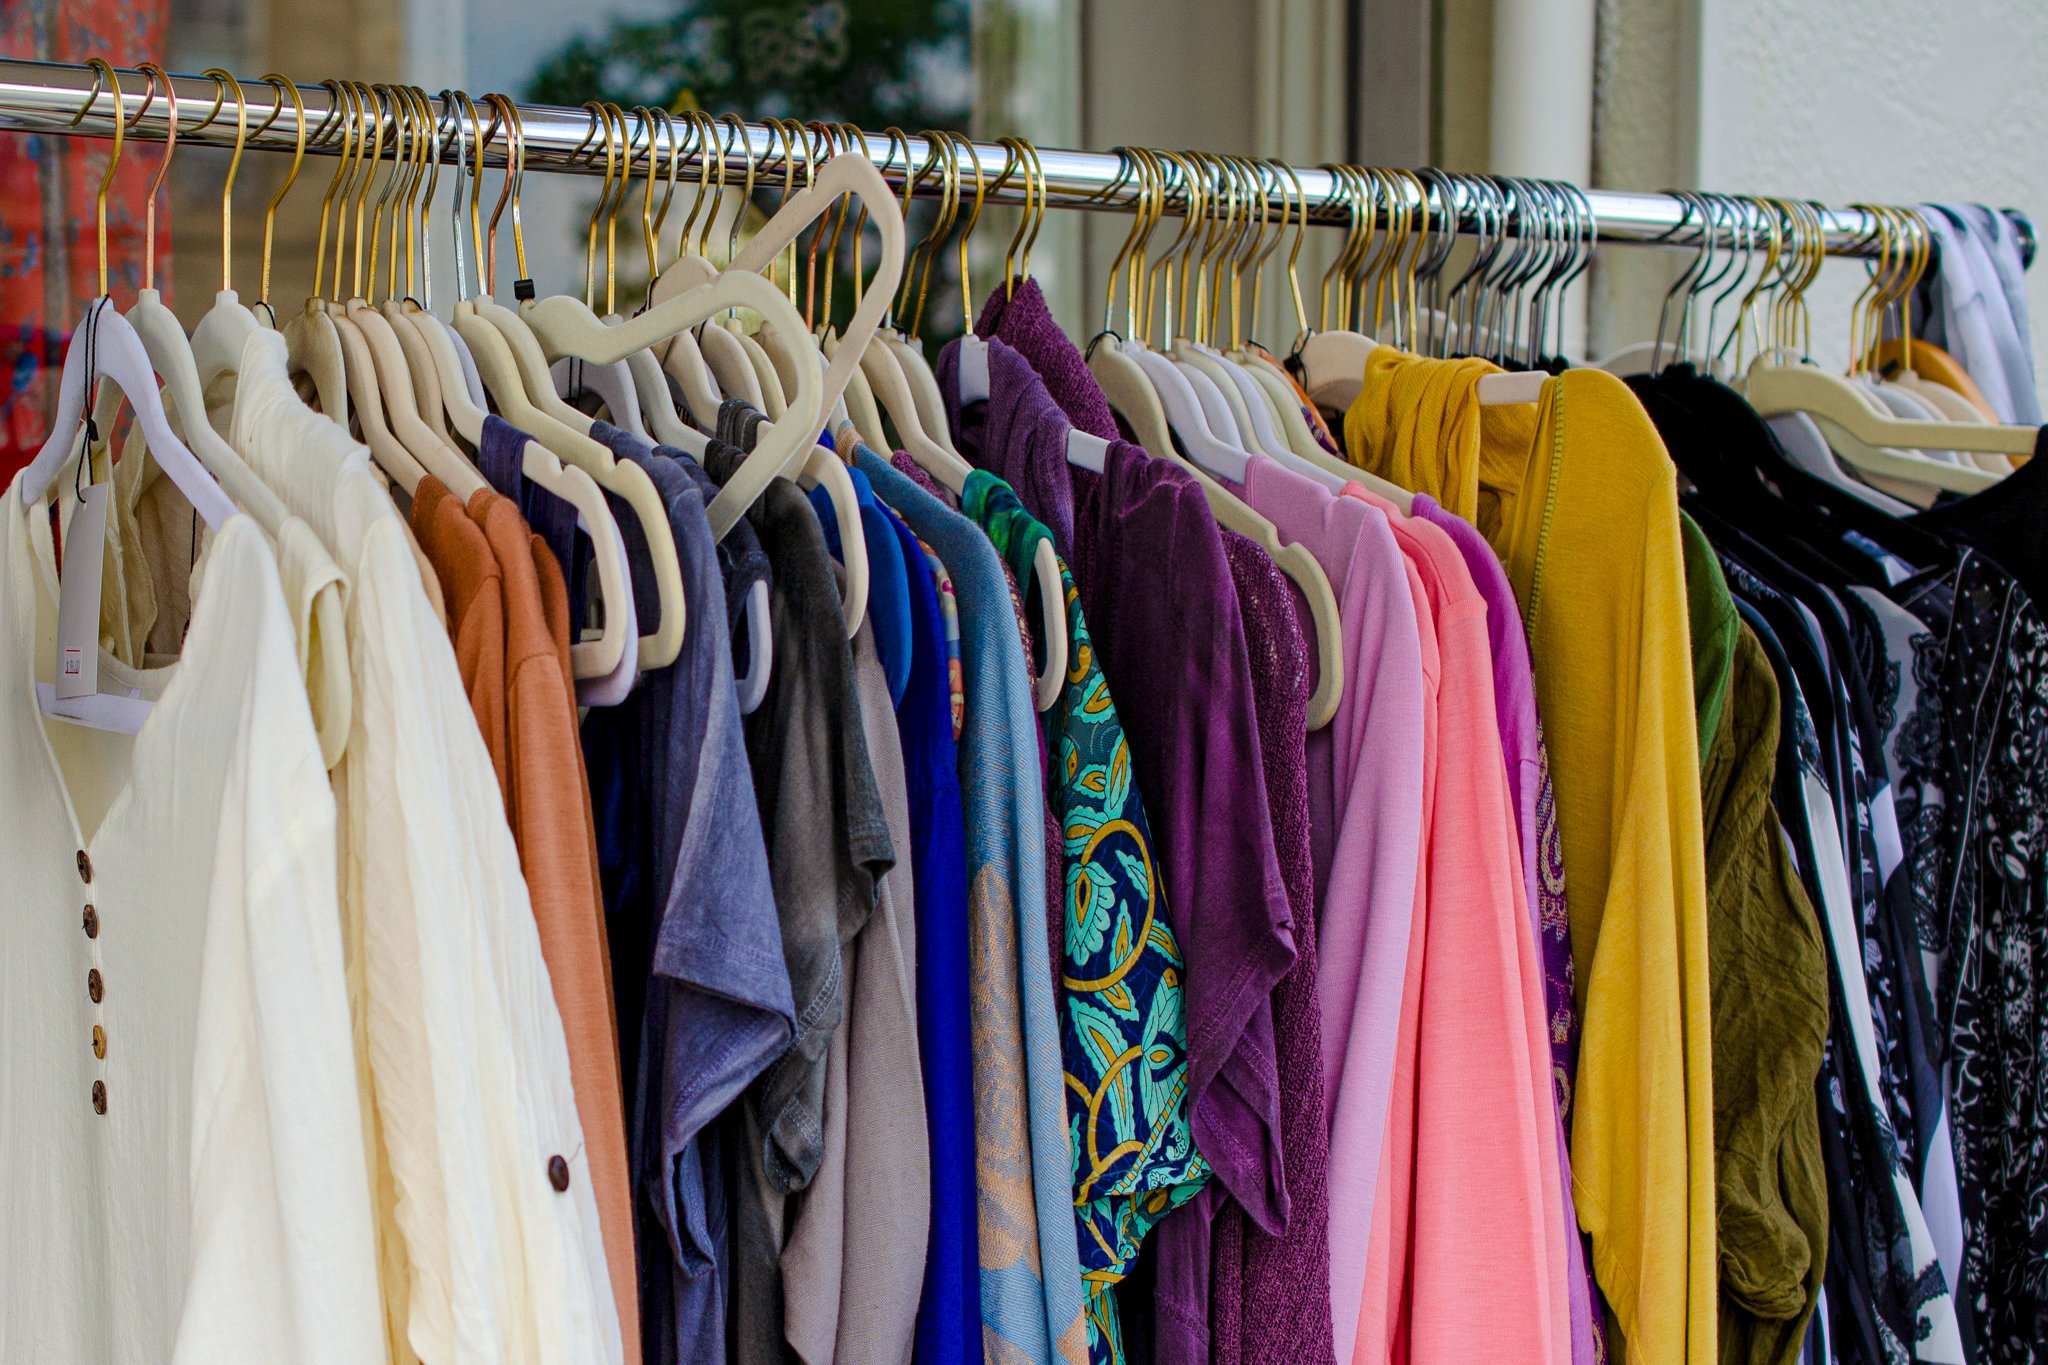 How to Color Coordinate Your Closet Like a Pro